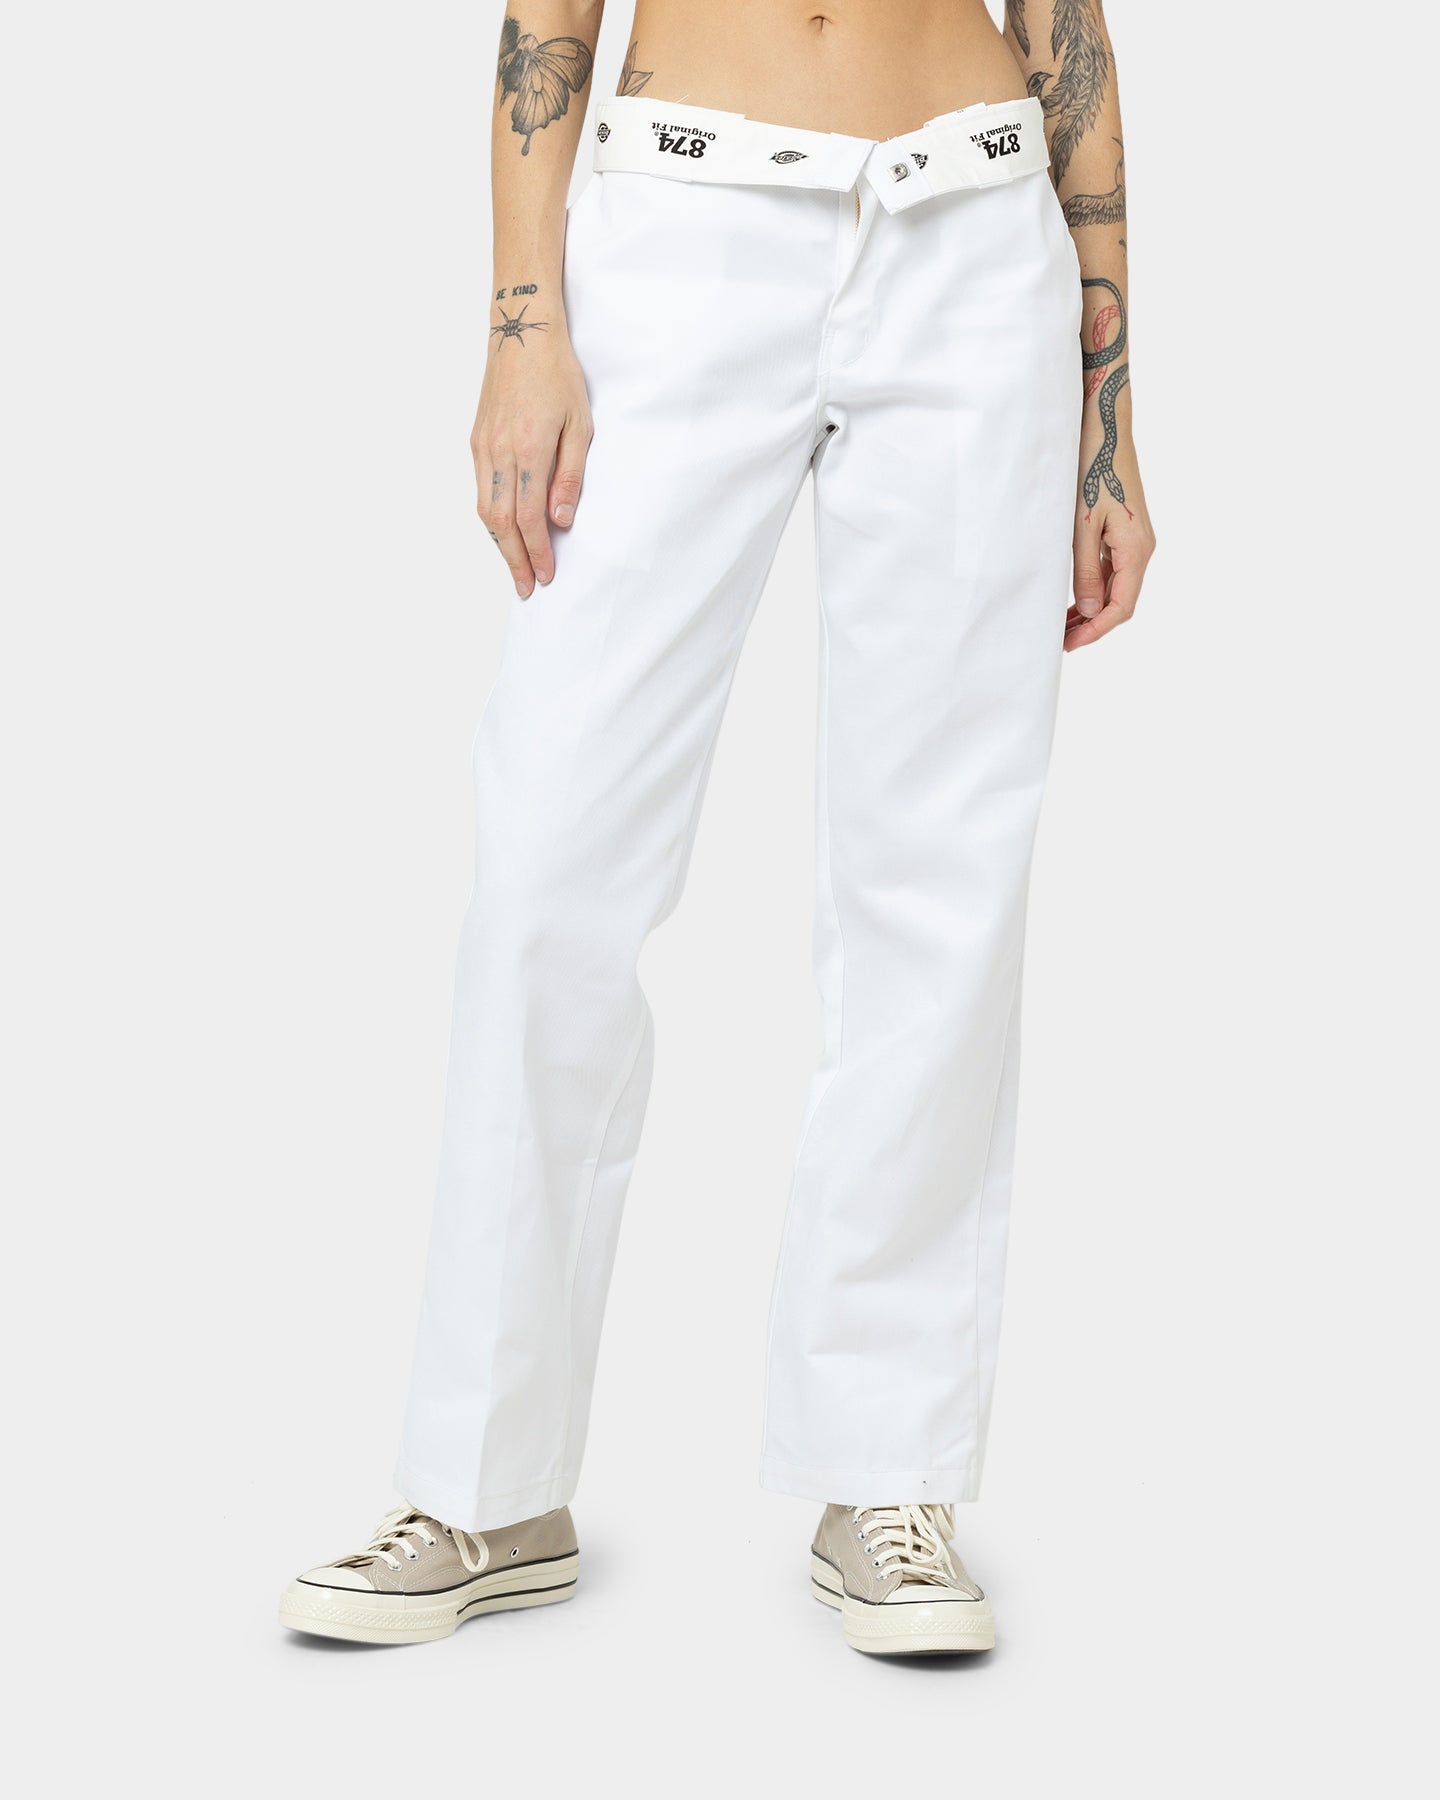 Only 48.74 usd for Dickies Original 874 Work Pants White Online at the Shop